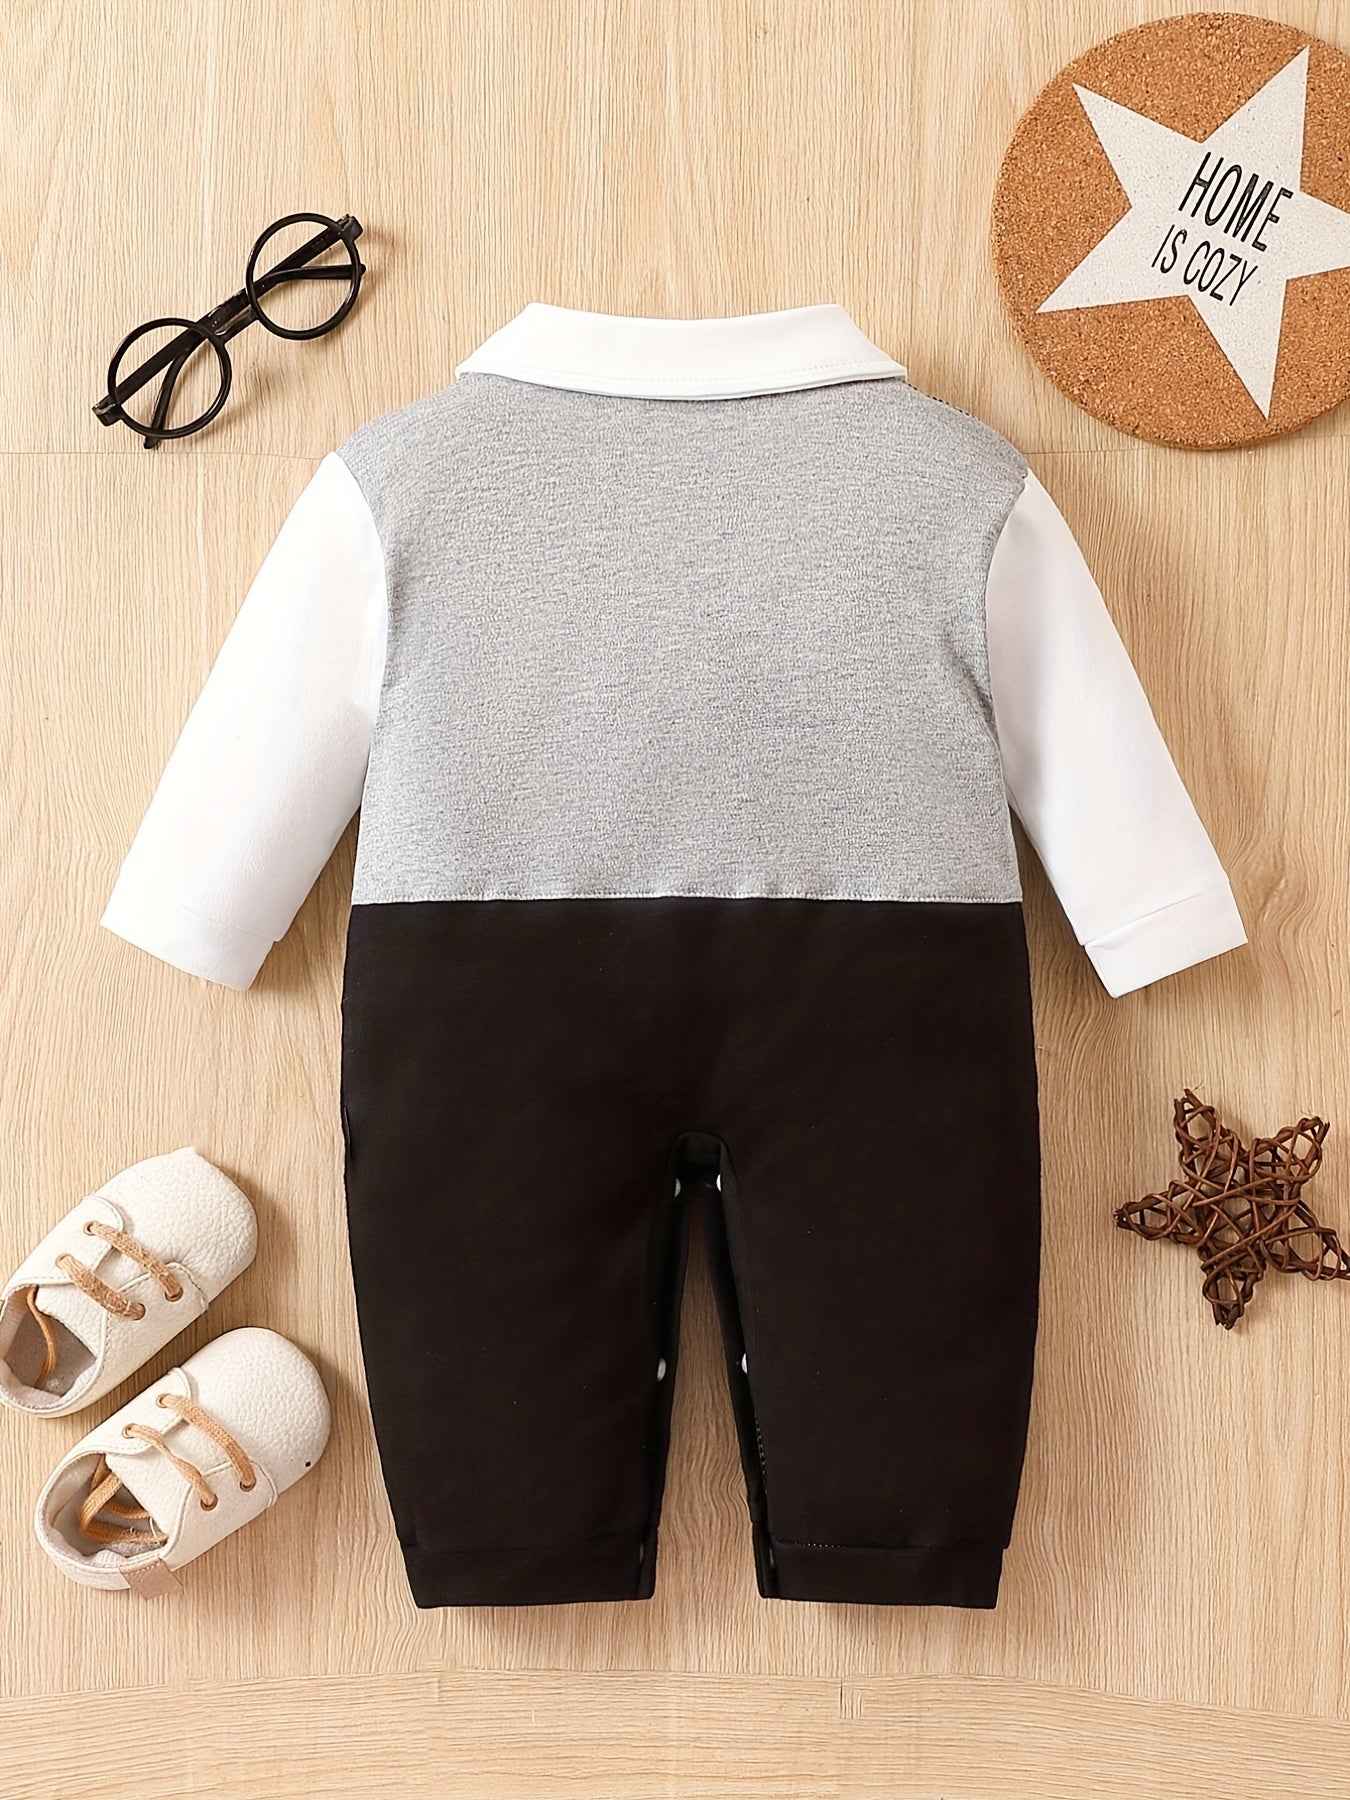 Little Gentleman Clothes Dress For Your Lovely Boy, Baby Long-sleeved Romper For Party Birthday